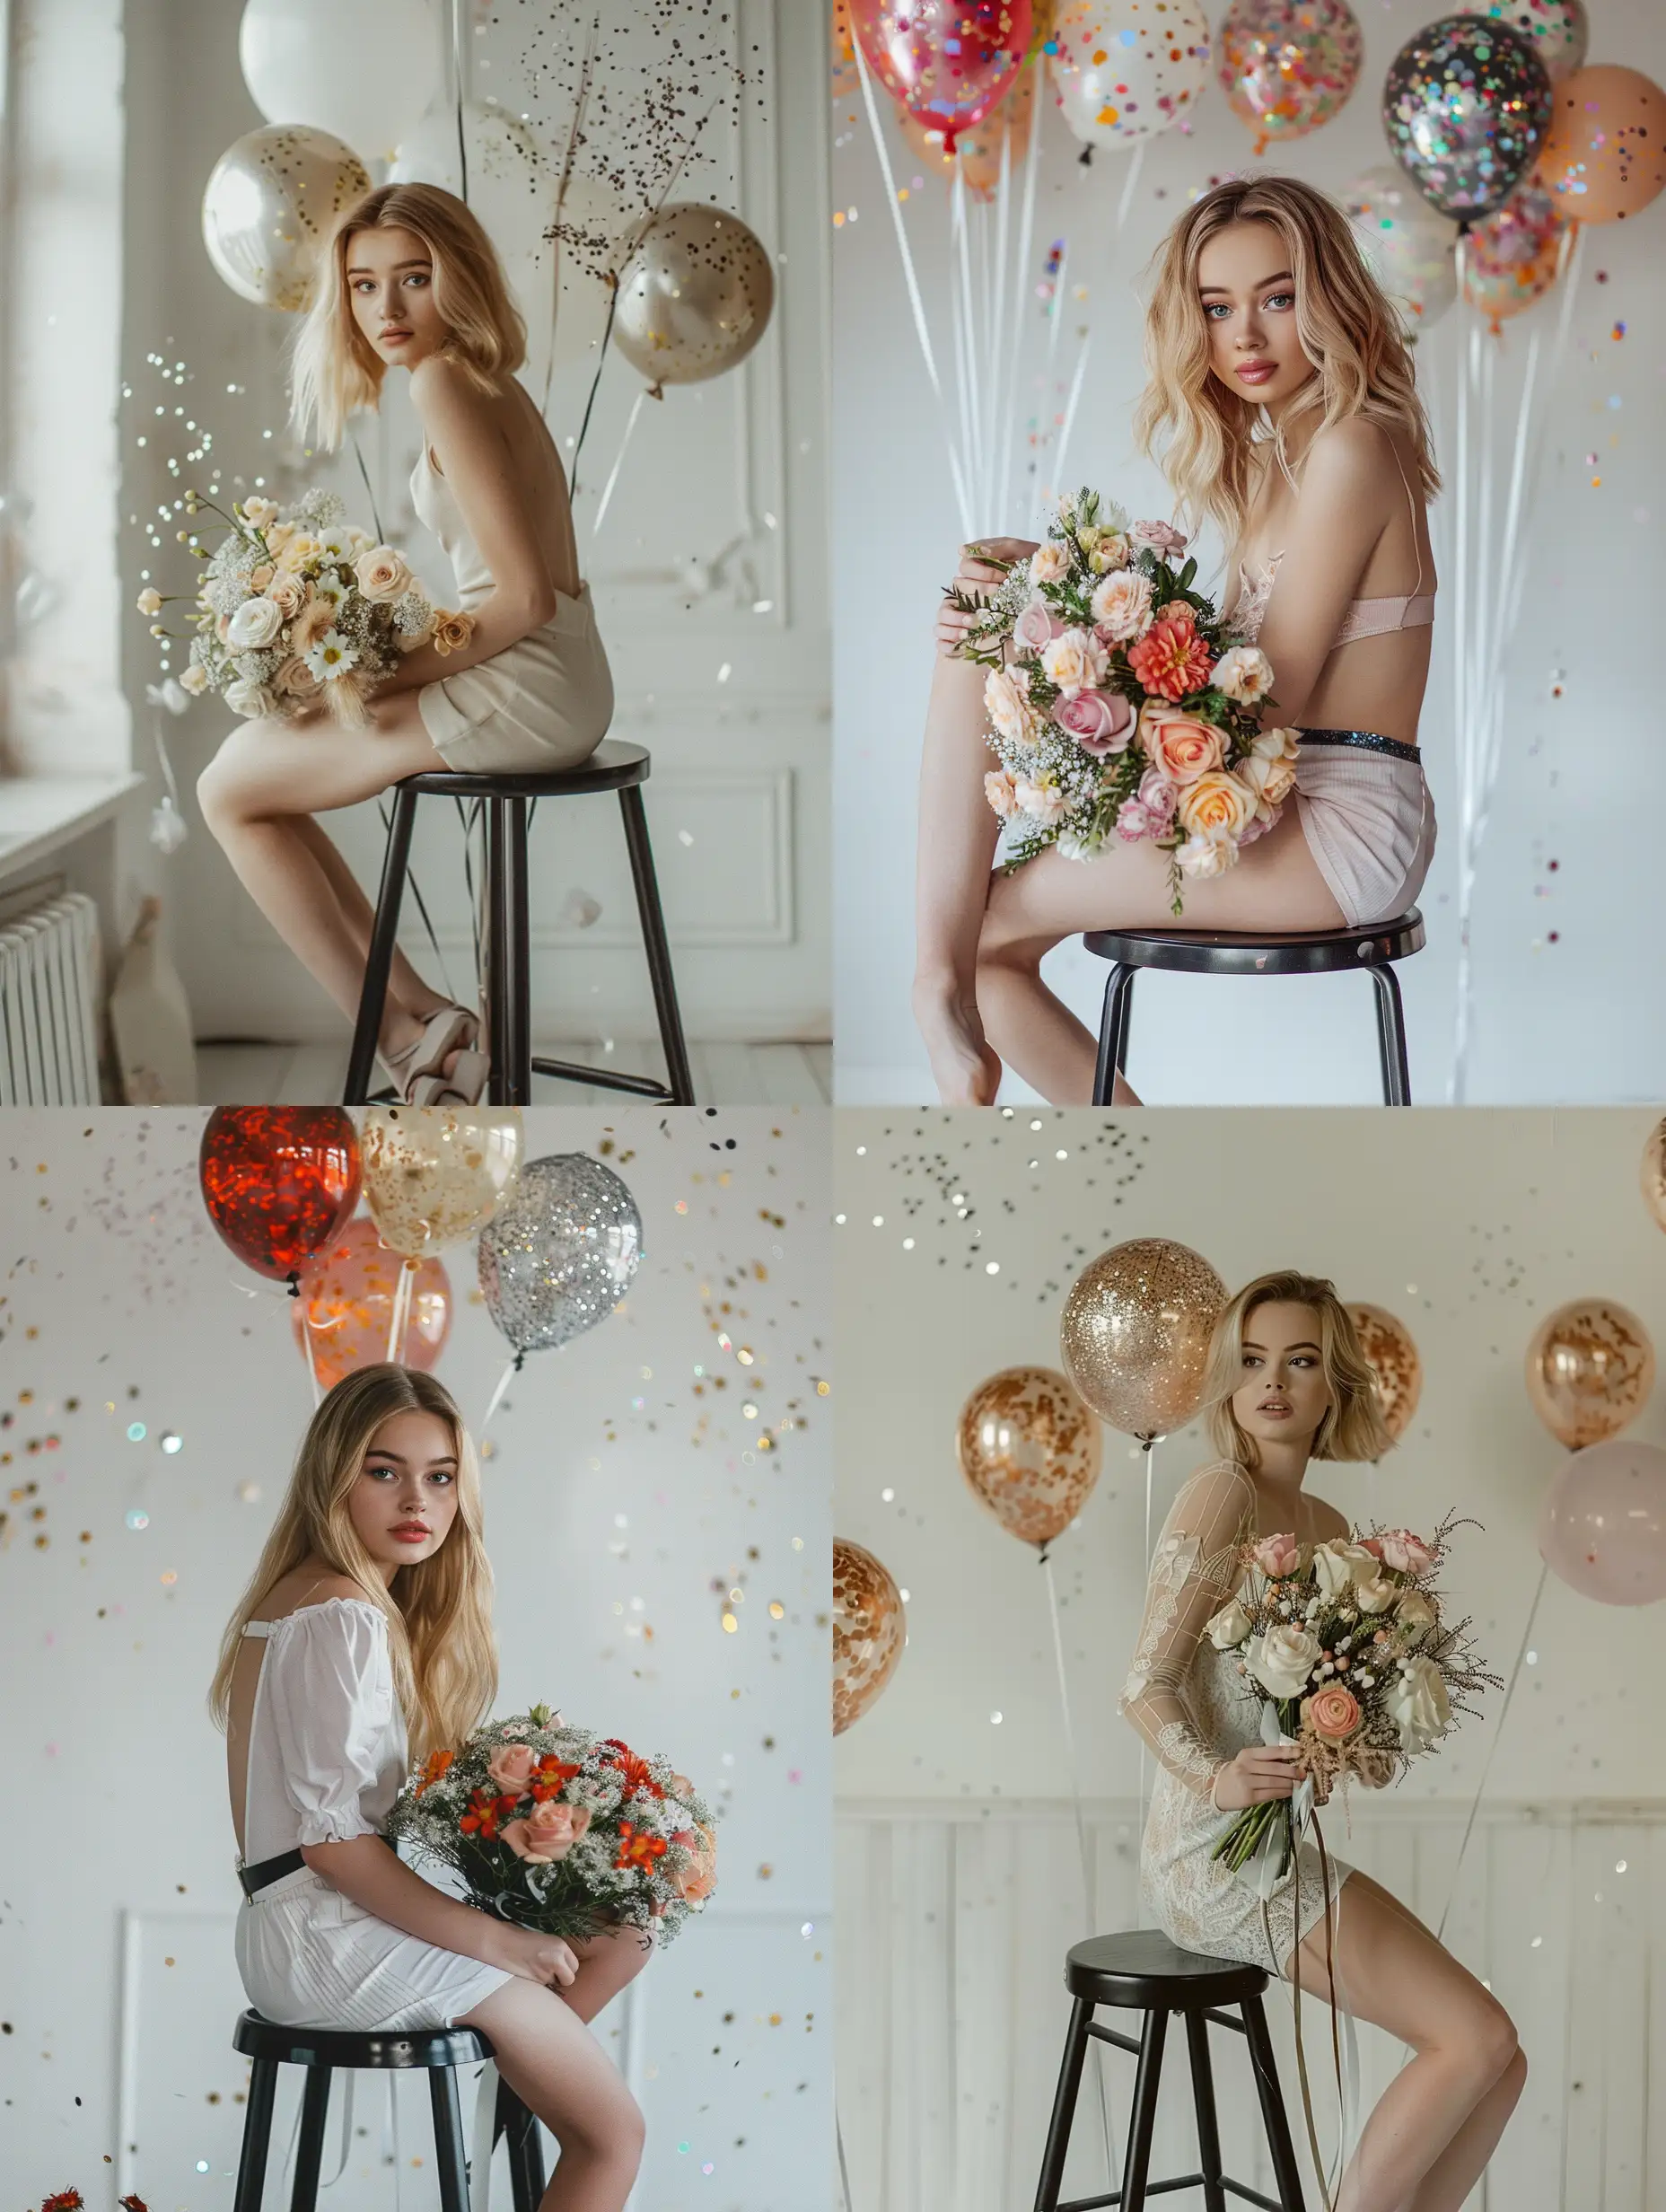 Young woman with blonde hair sitting below shoulder in studio on blackz high stool in room with white walls in hands bouquet with flowers. The room is decorated with glitter and balloons made of falsa realistic photo photo shoot girl looking at the camera face well seen detailing 